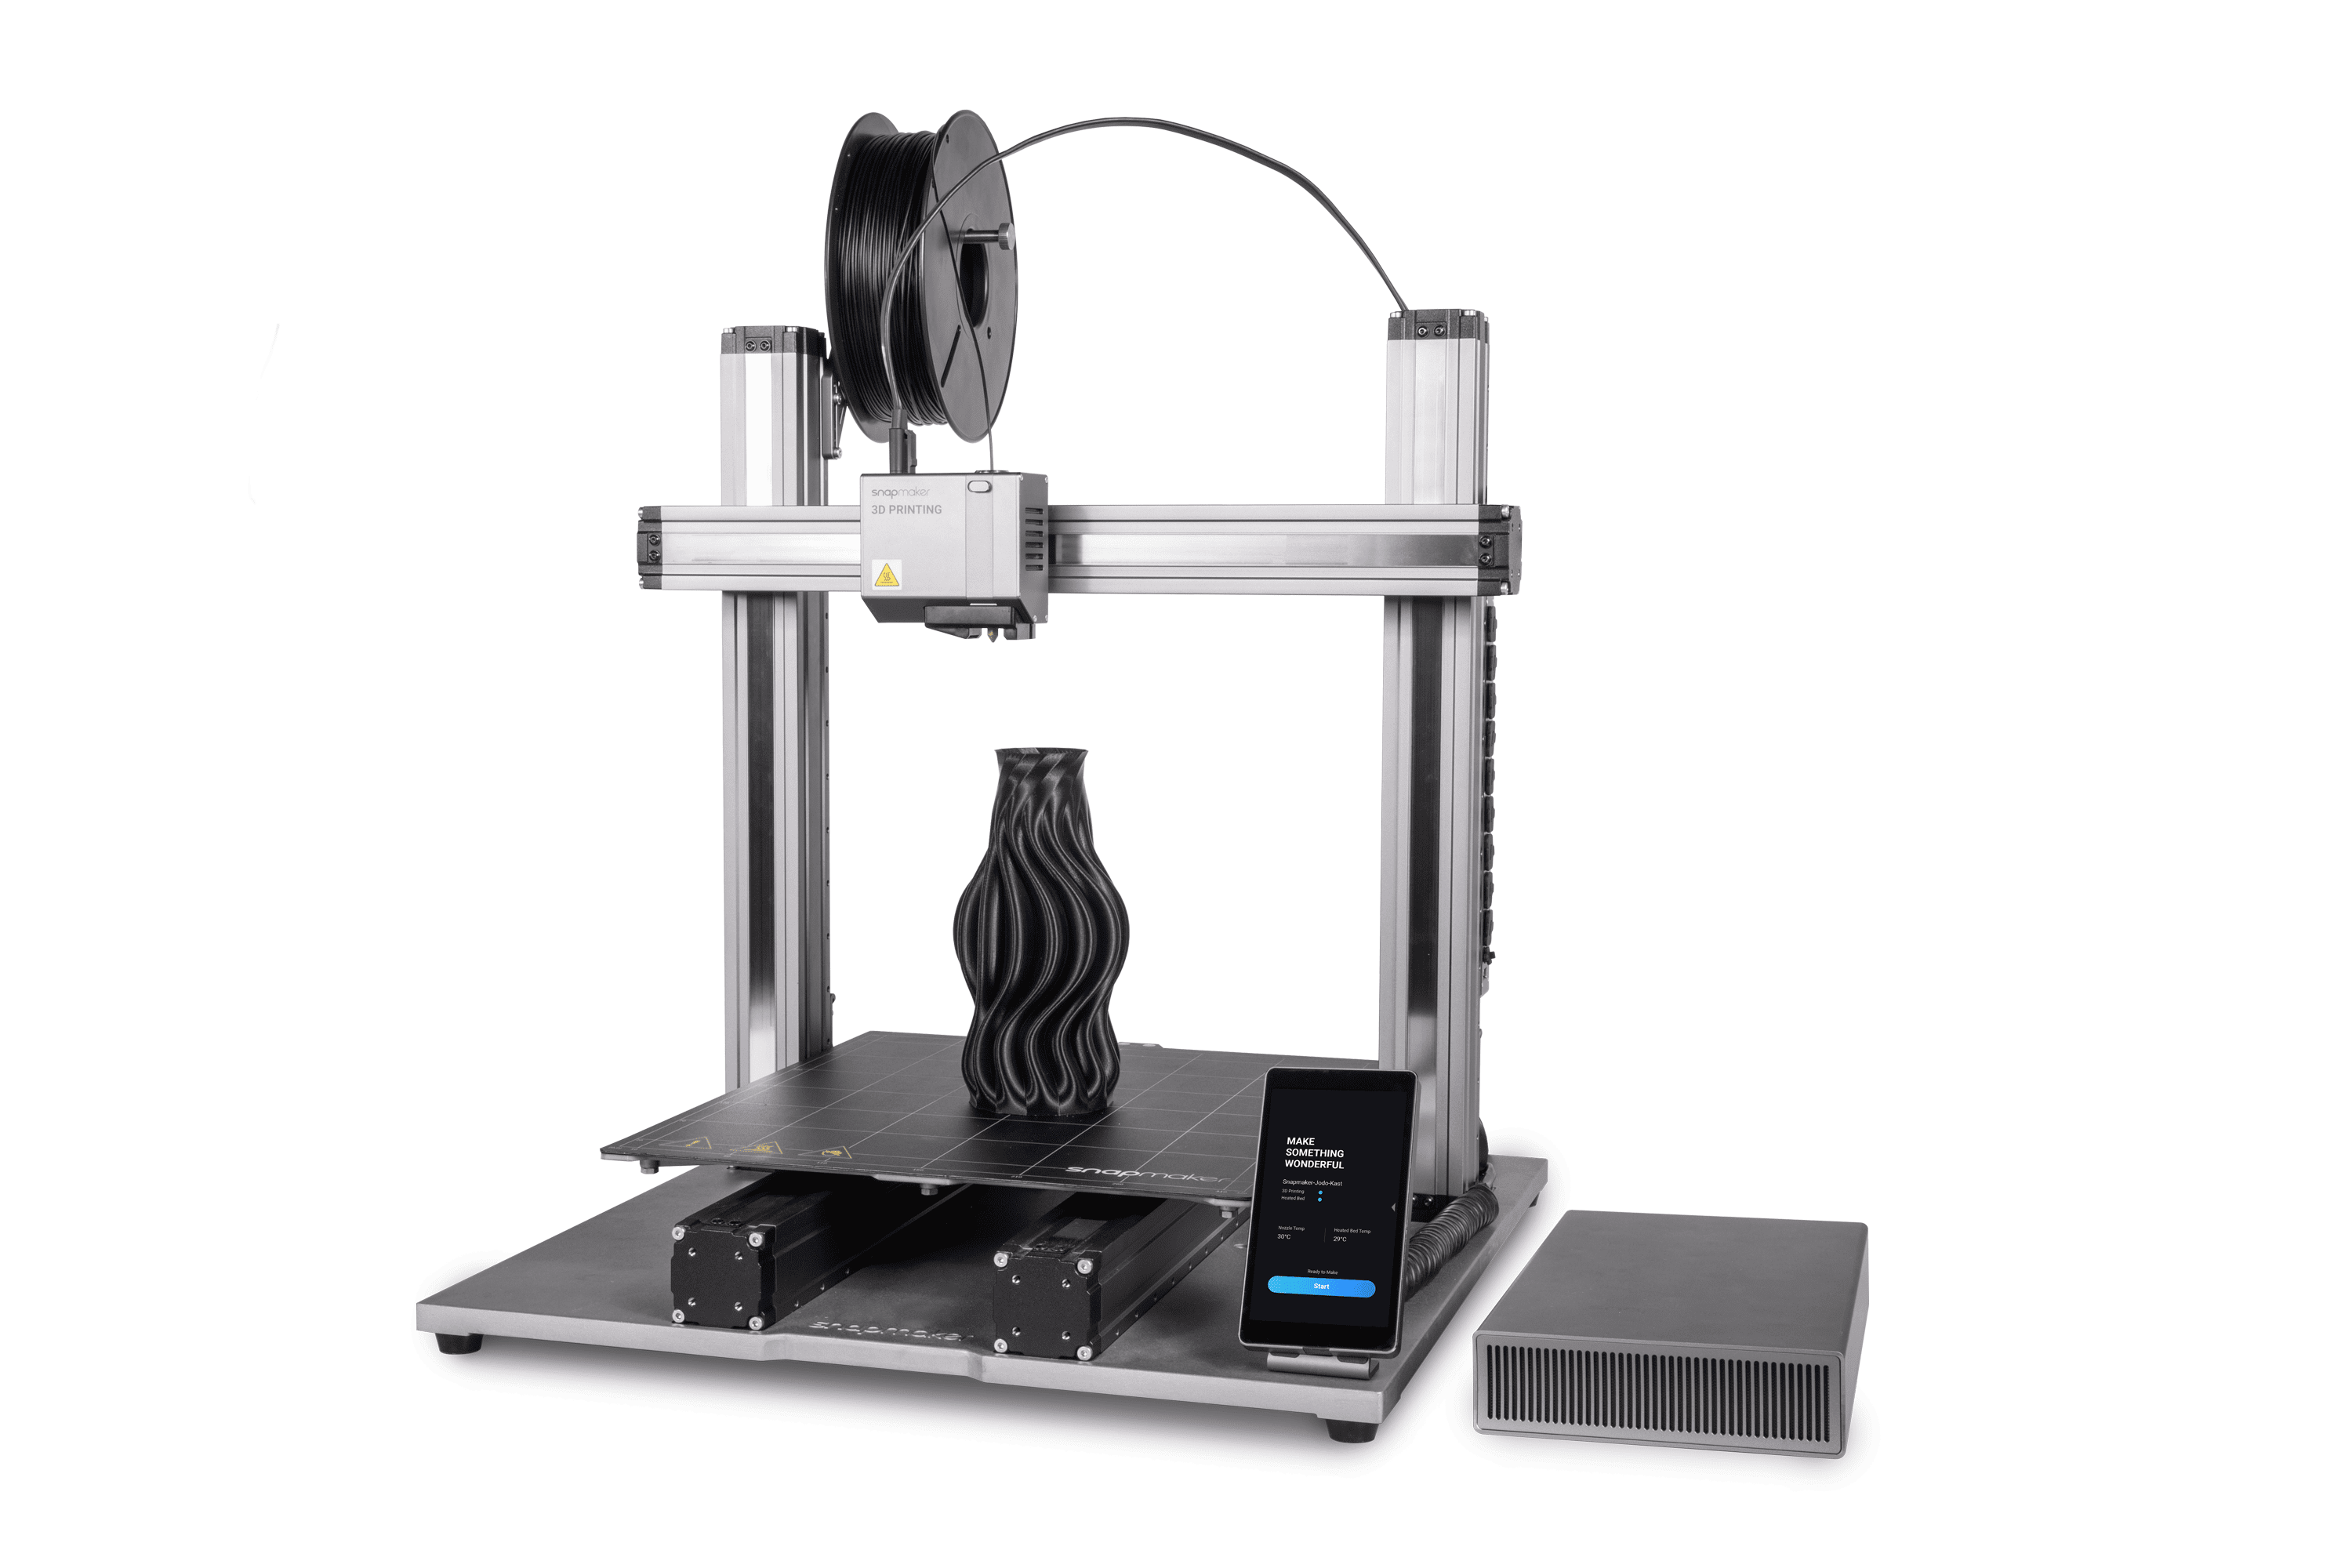 Snapmaker-2-0-3-in-1-3D-Printer-A350-80012-26330_1